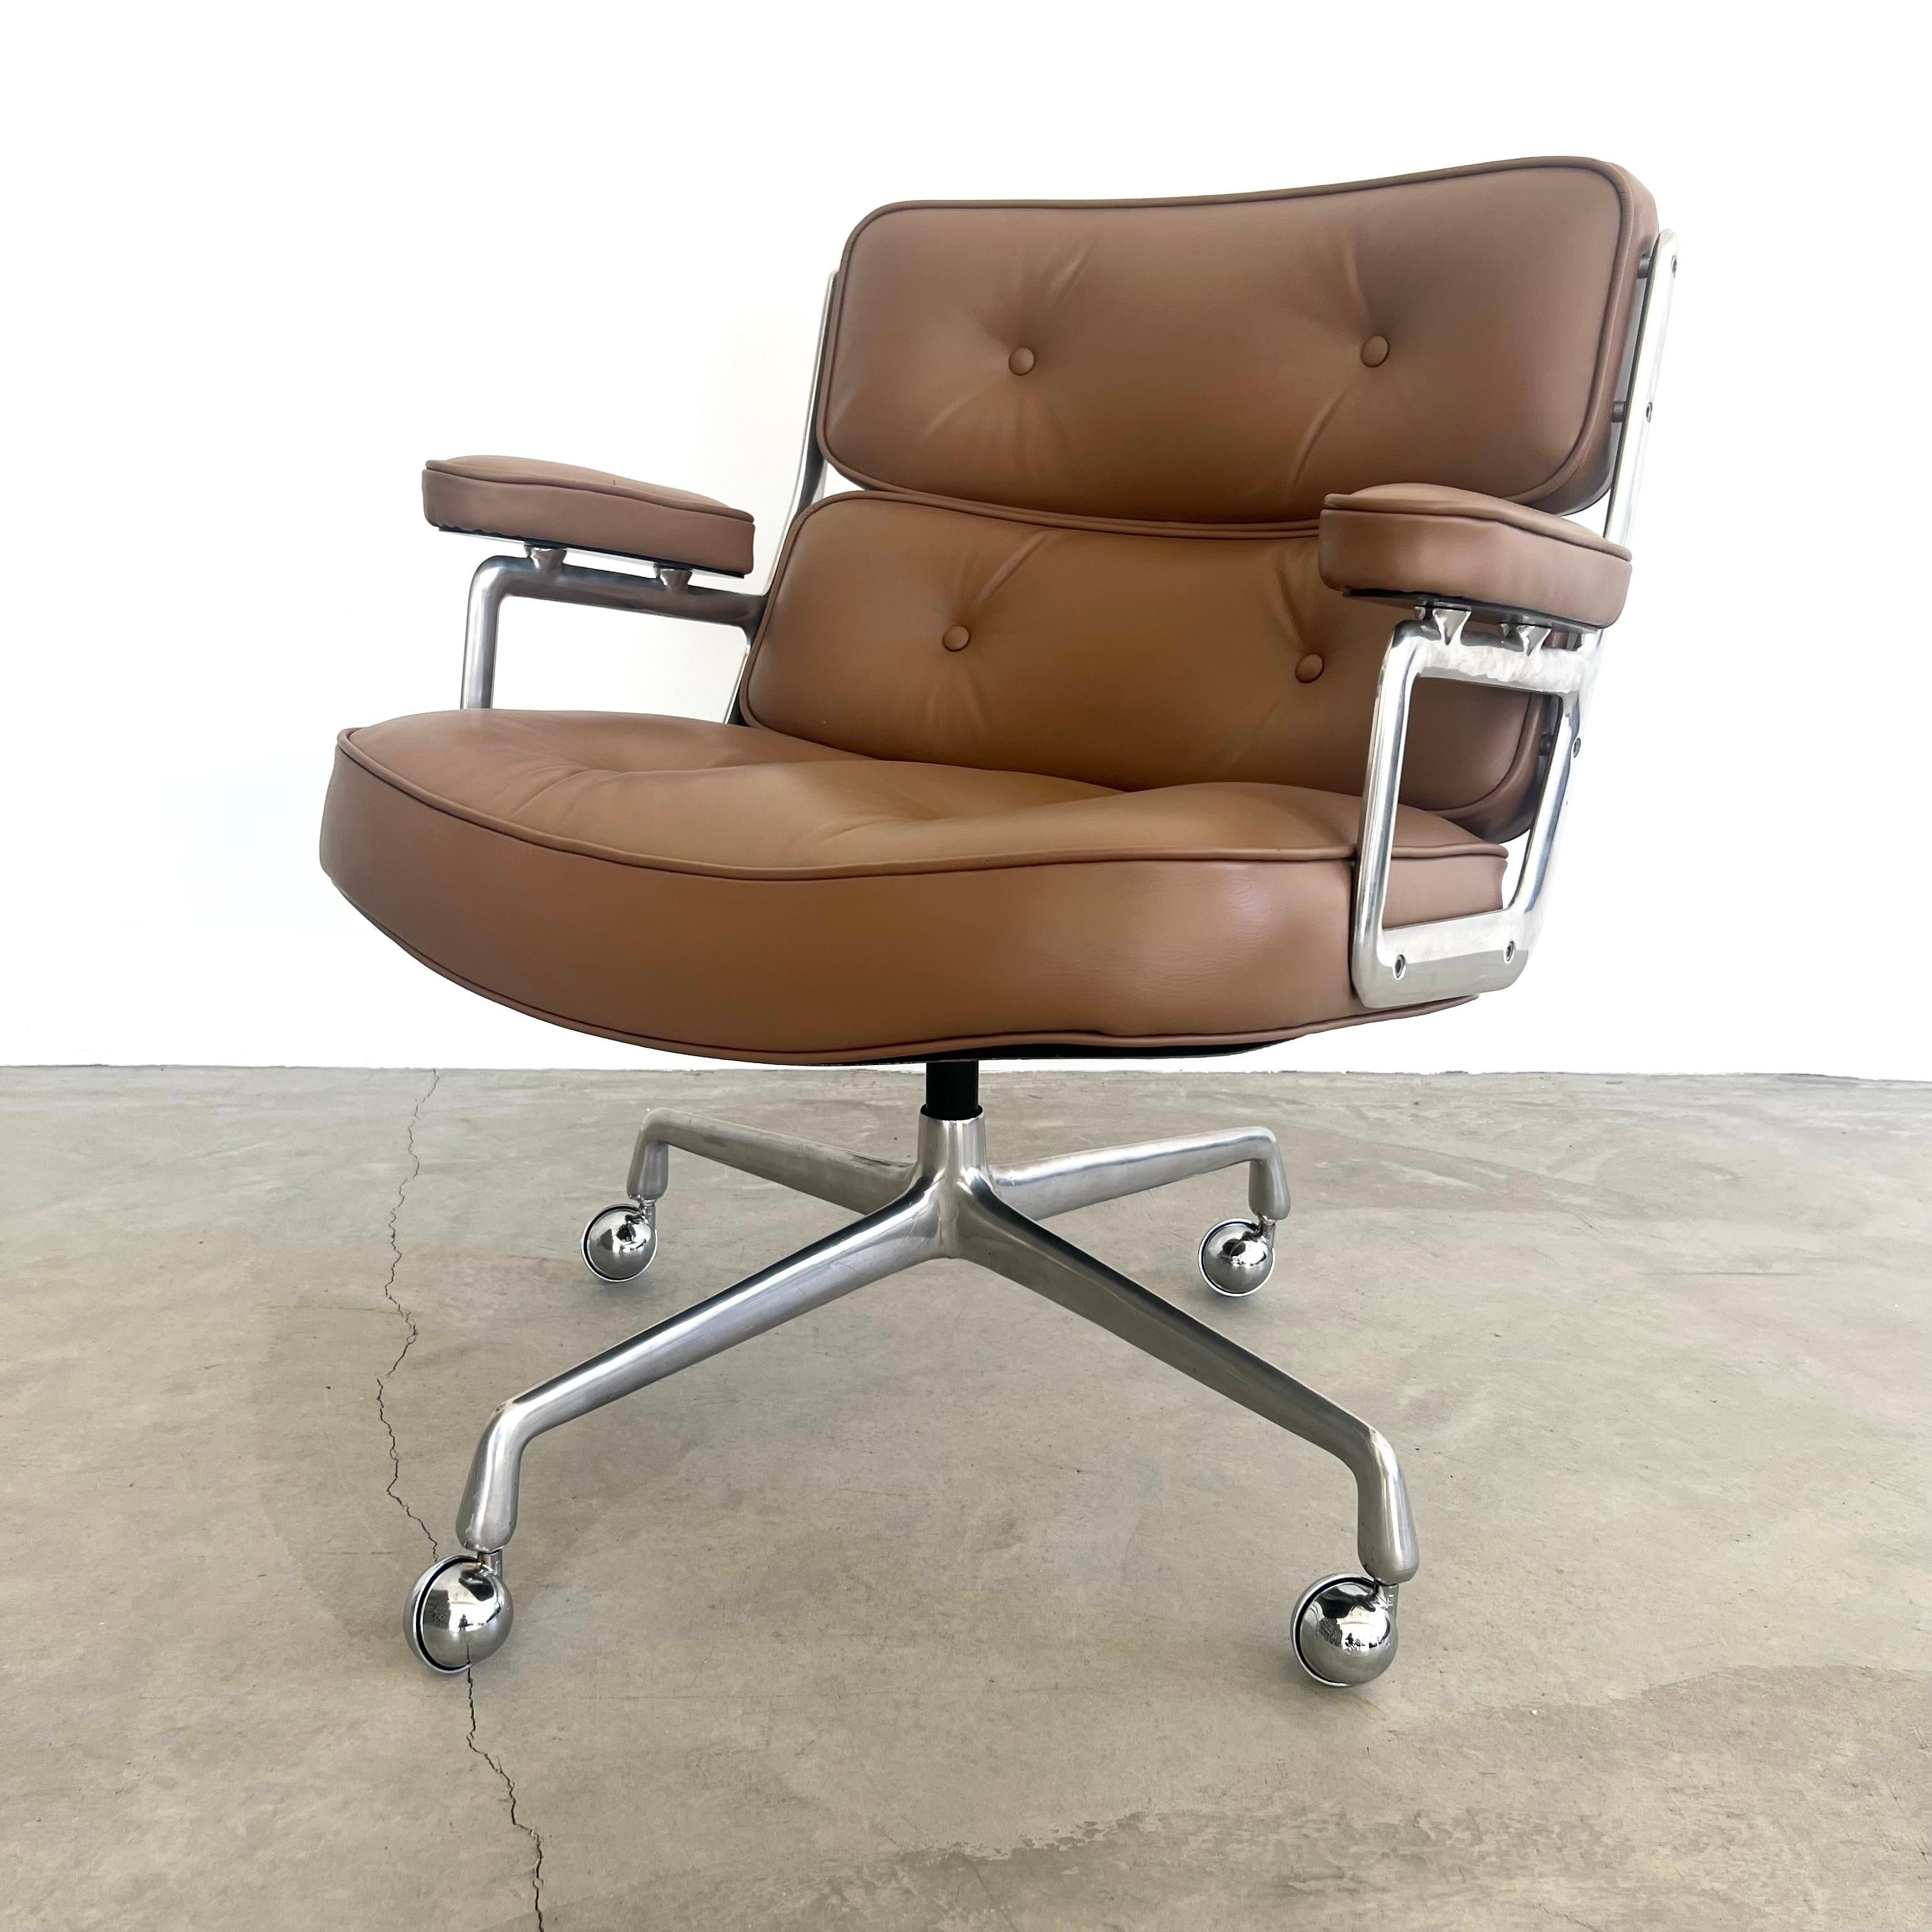 Late 20th Century Eames Time Life Lobby Lounge Chair in Tan Leather for Herman Miller, 1980s USA